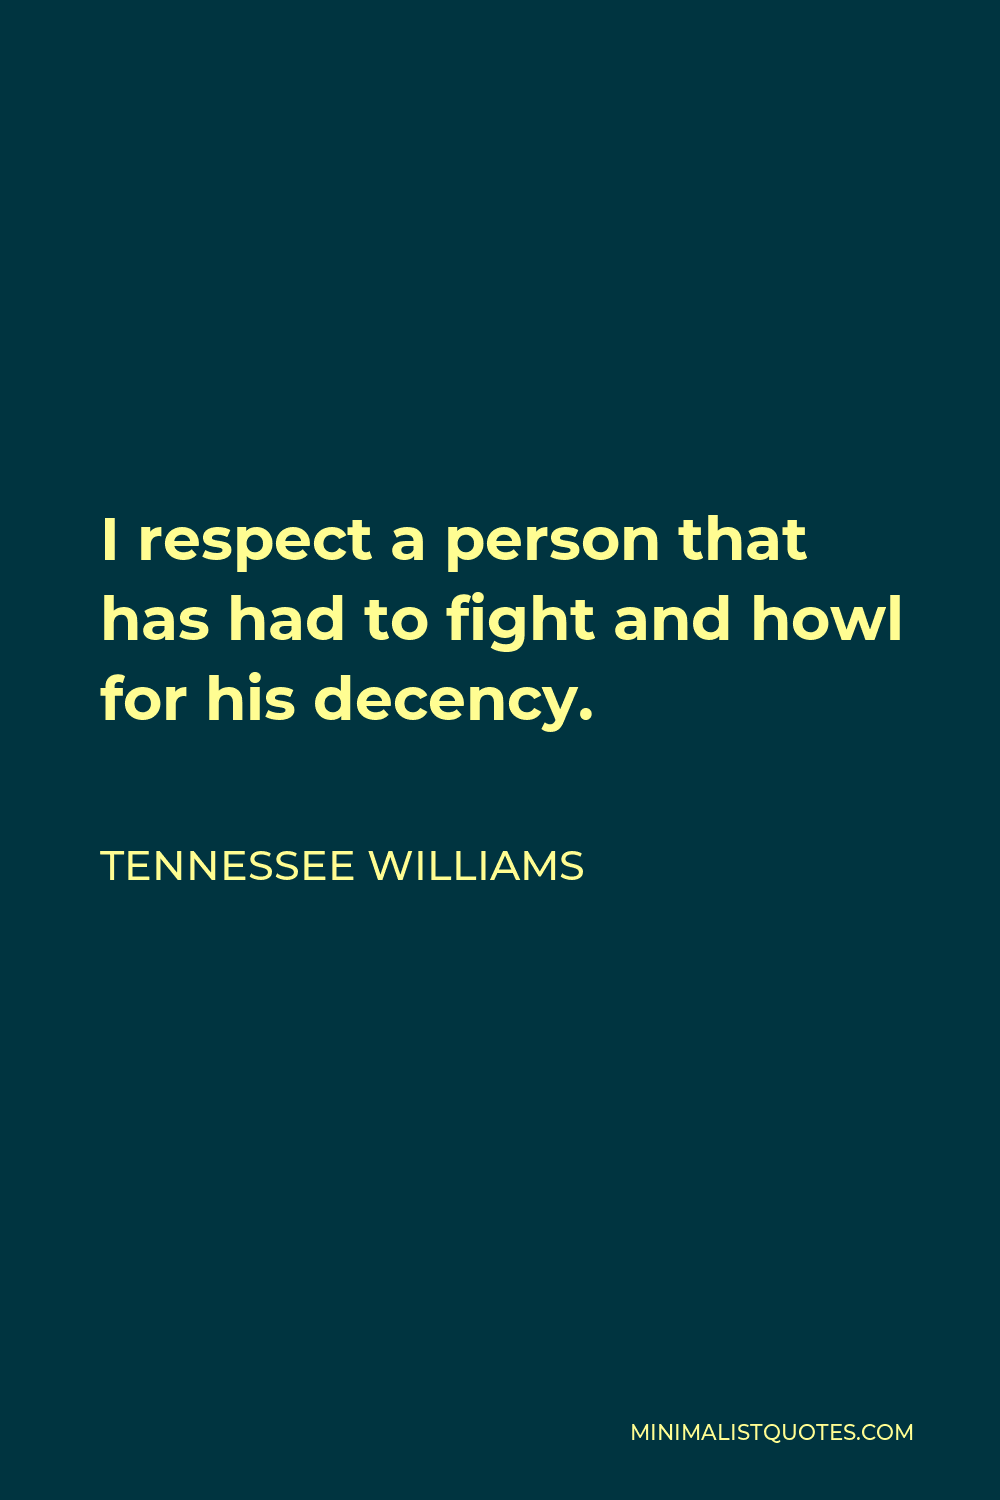 Tennessee Williams Quote - I respect a person that has had to fight and howl for his decency.